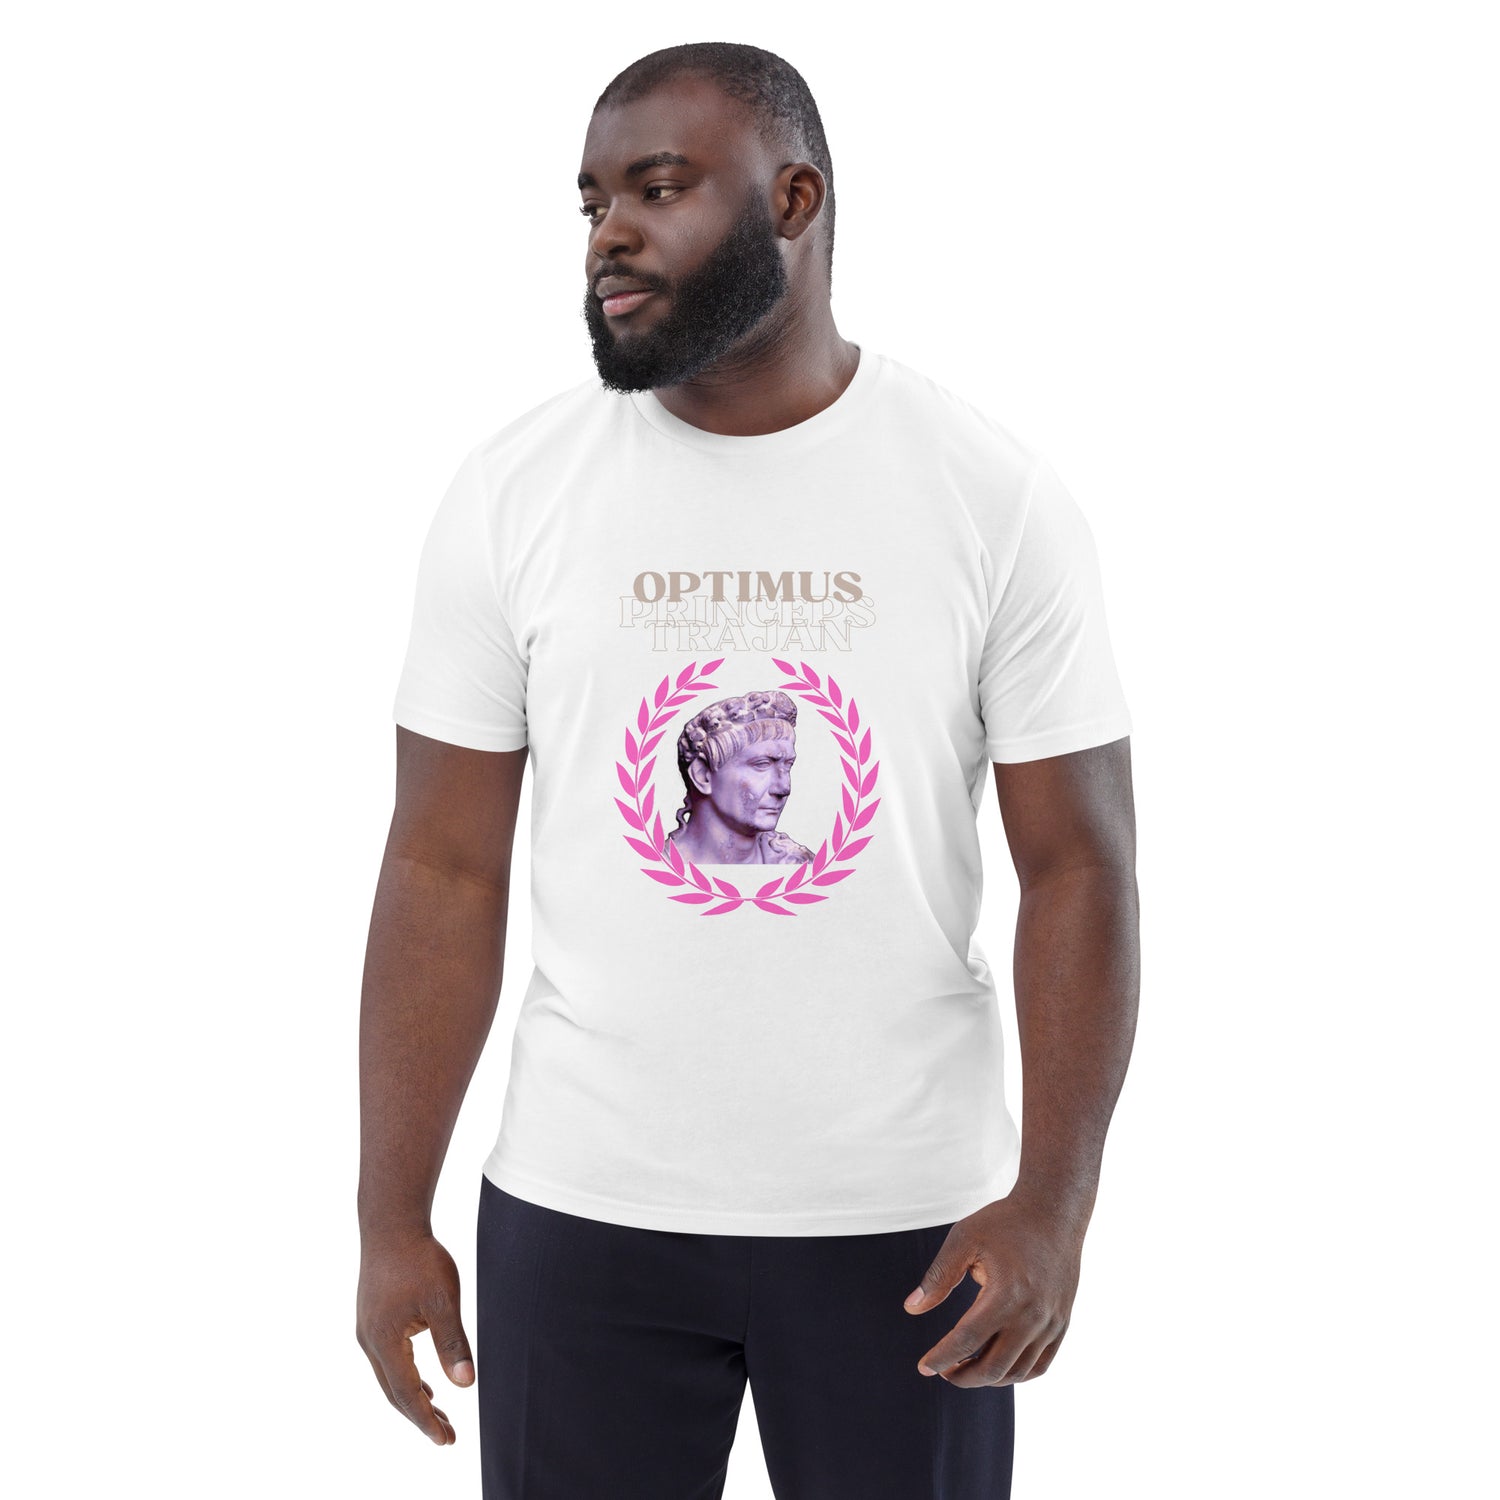 Optimus Princeps Trajan T-Shirt Embrace the Power of Greatness - Emperor